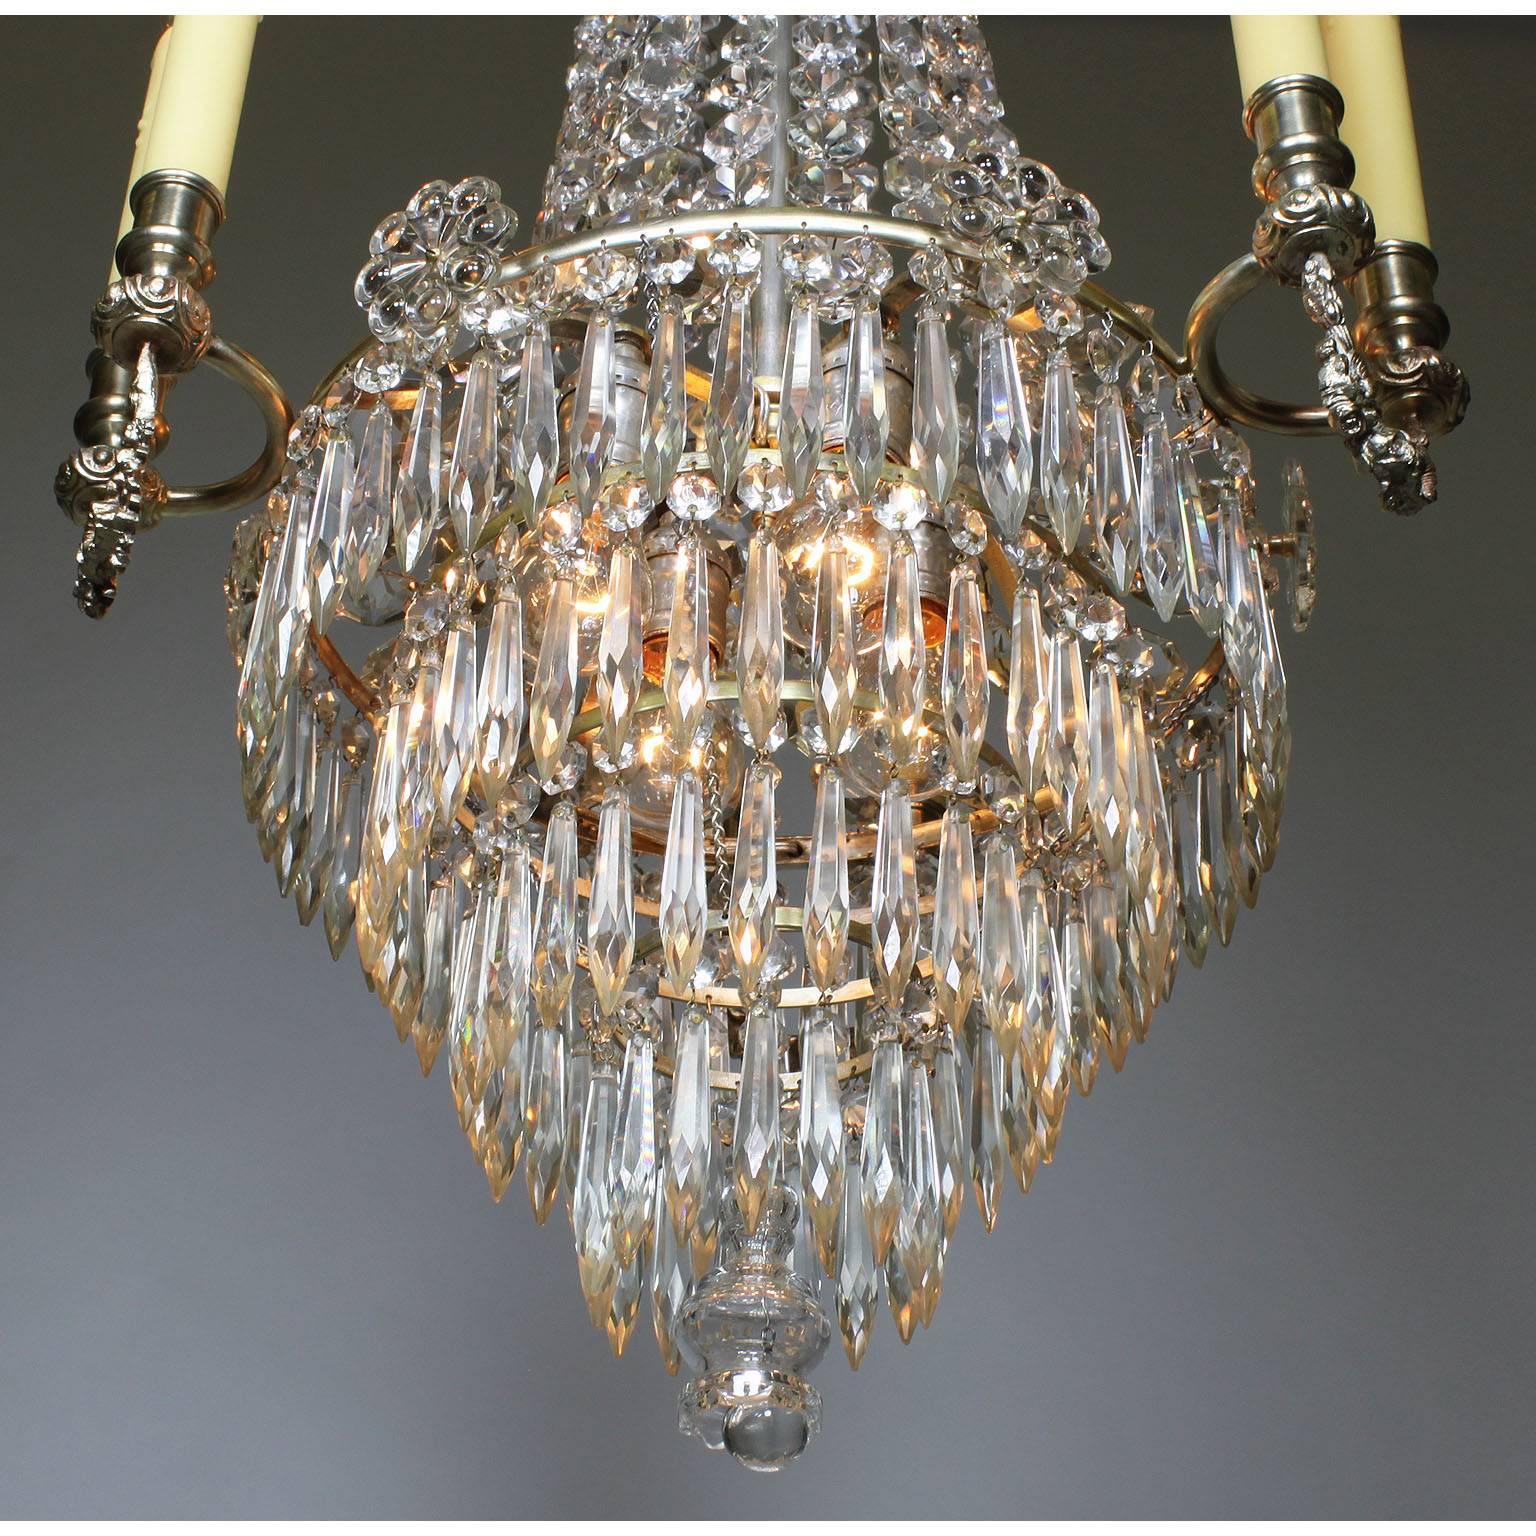 French 19th-20th Century Louis XVI Style Silvered Bronze & Cut-Glass Chandelier For Sale 1